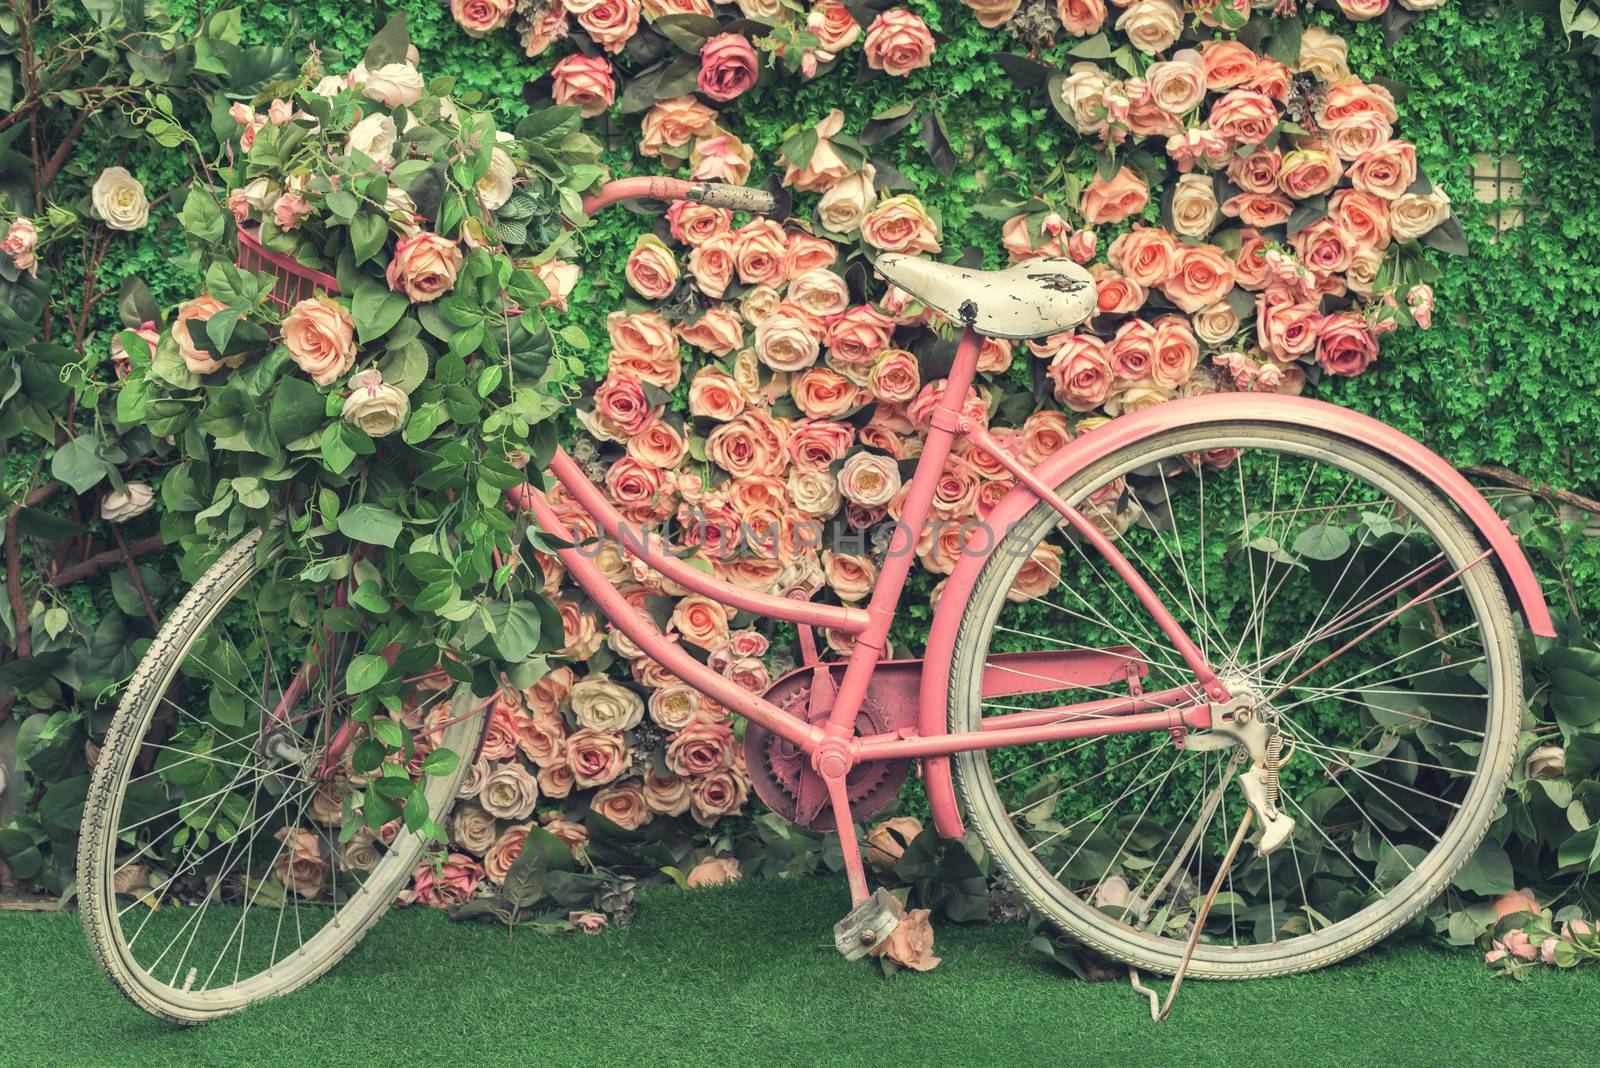 Flowers and bicycle. Bicycle in a garden